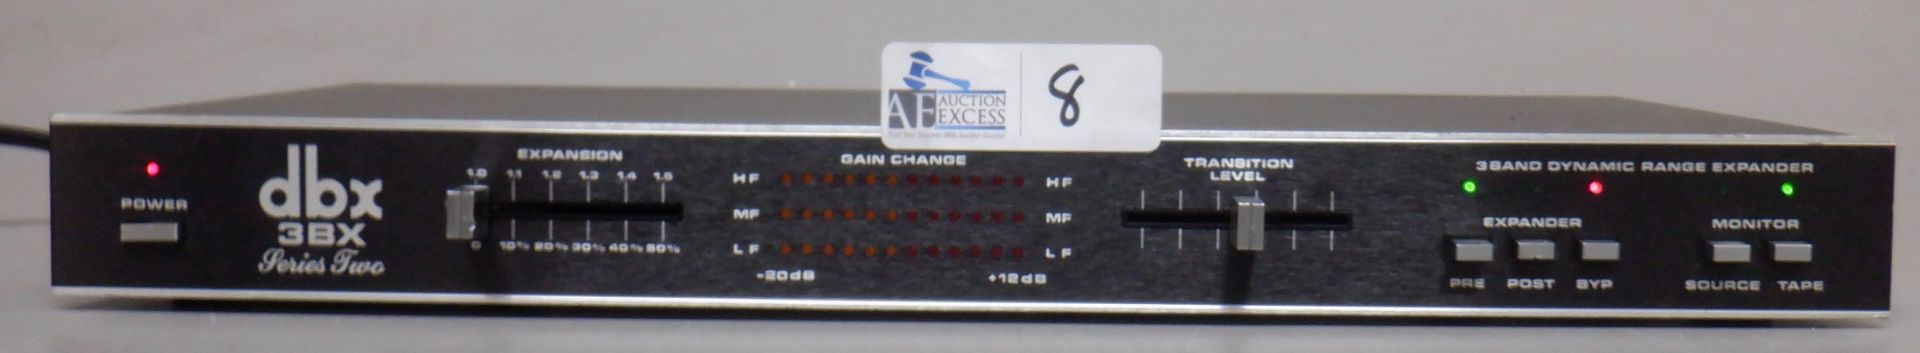 DBX 3BX SERIES TWO NOISE REDUCTION